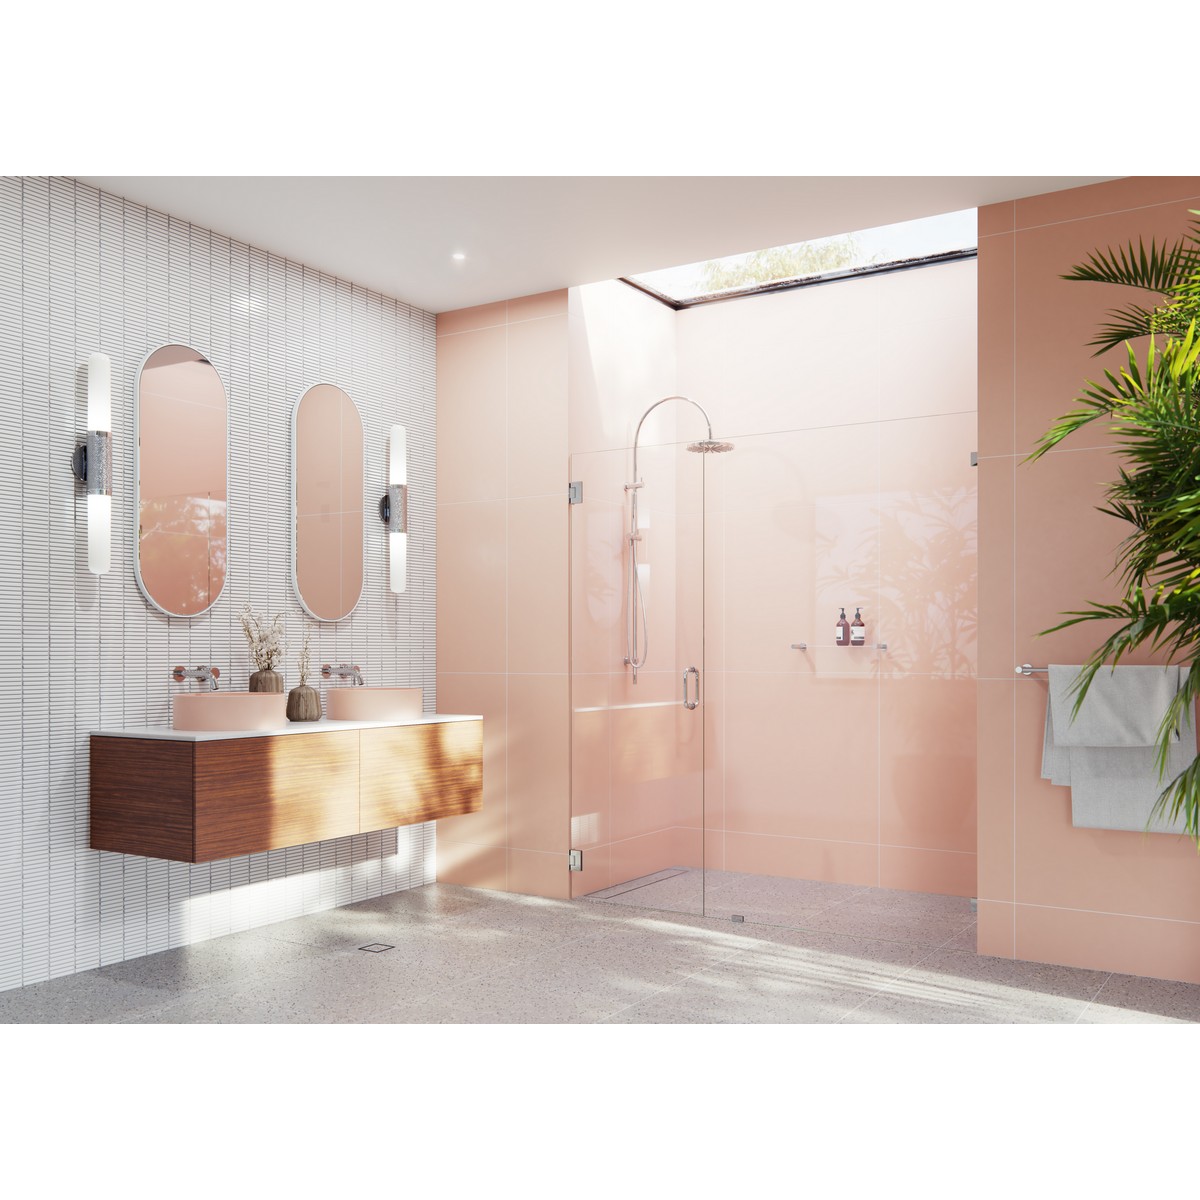 GLASS WAREHOUSE GW-WH-77.75 ILLUME 77 3/4 W X 78 H WALL HINGED FULLY FRAMELESS GLASS SHOWER ENCLOSURE